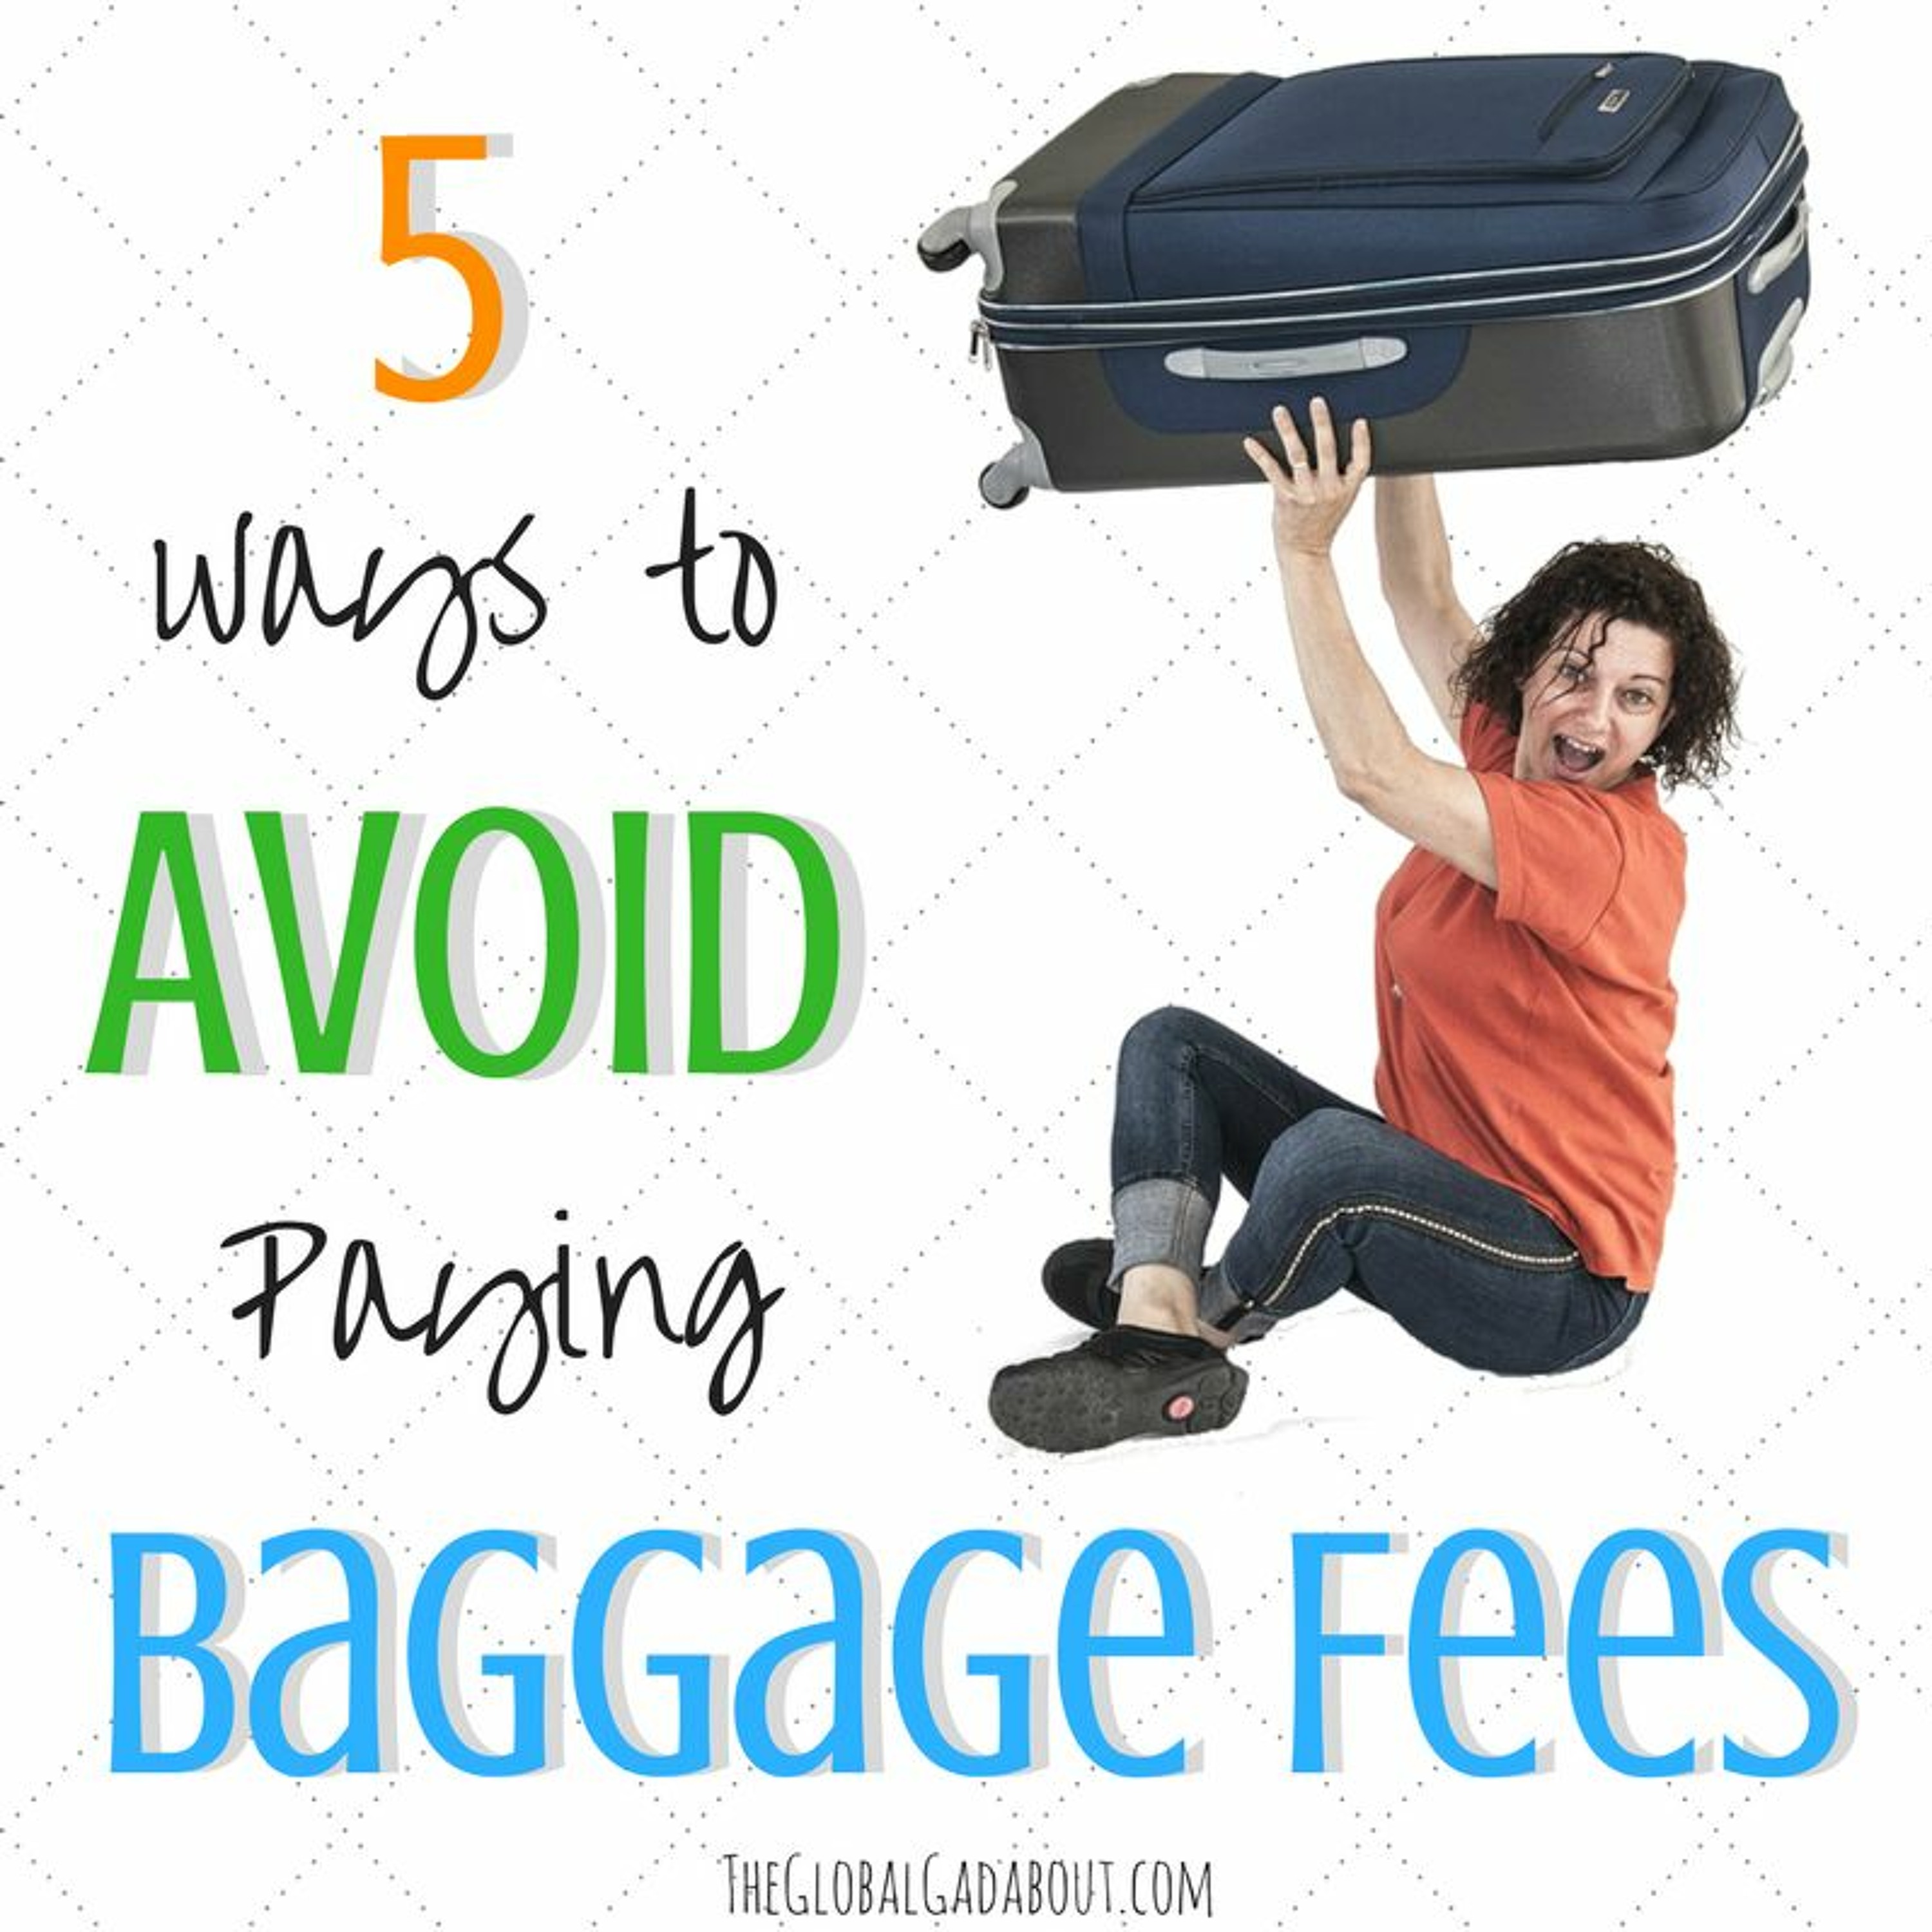 5 Ways To Avoid Paying Baggage Fees